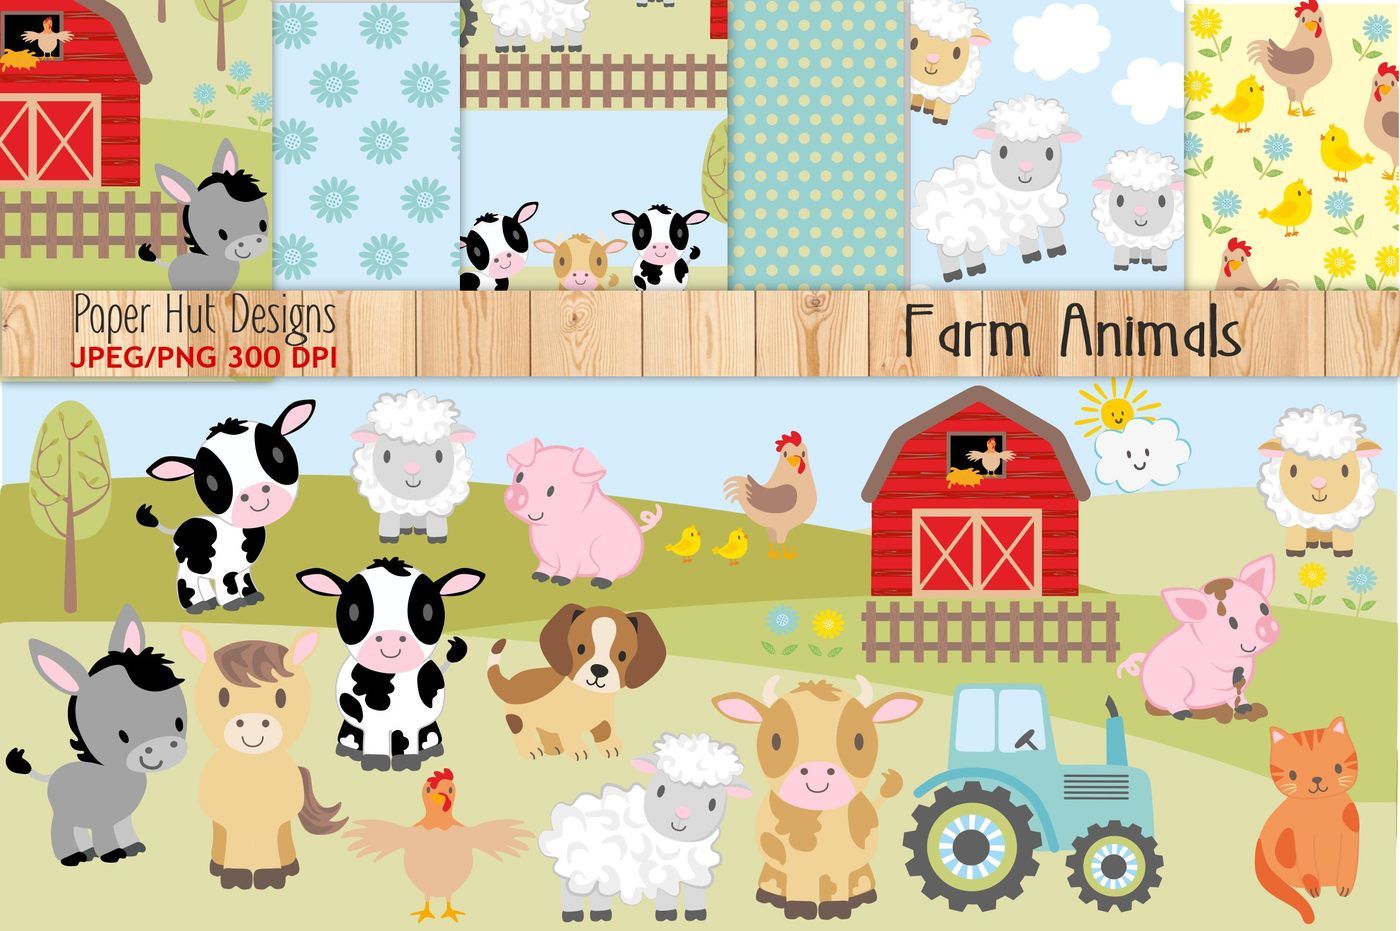 Farm Animals Clipart And Digital Paper Set By Paperhutdesigns